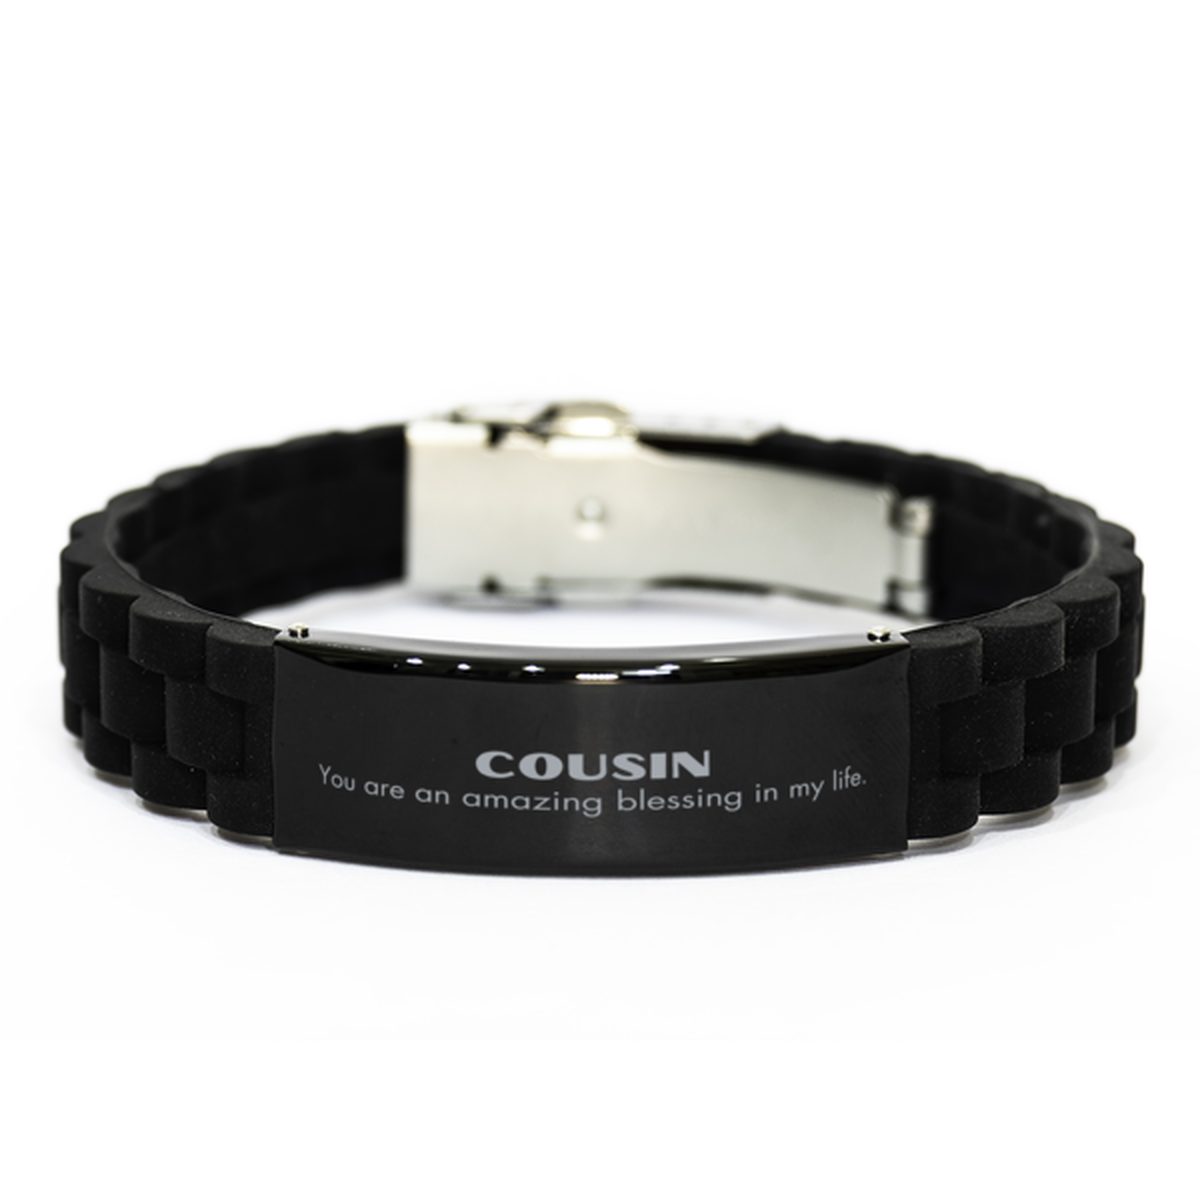 Cousin Black Glidelock Clasp Bracelet, You are an amazing blessing in my life, Thank You Gifts For Cousin, Inspirational Birthday Christmas Unique Gifts For Cousin